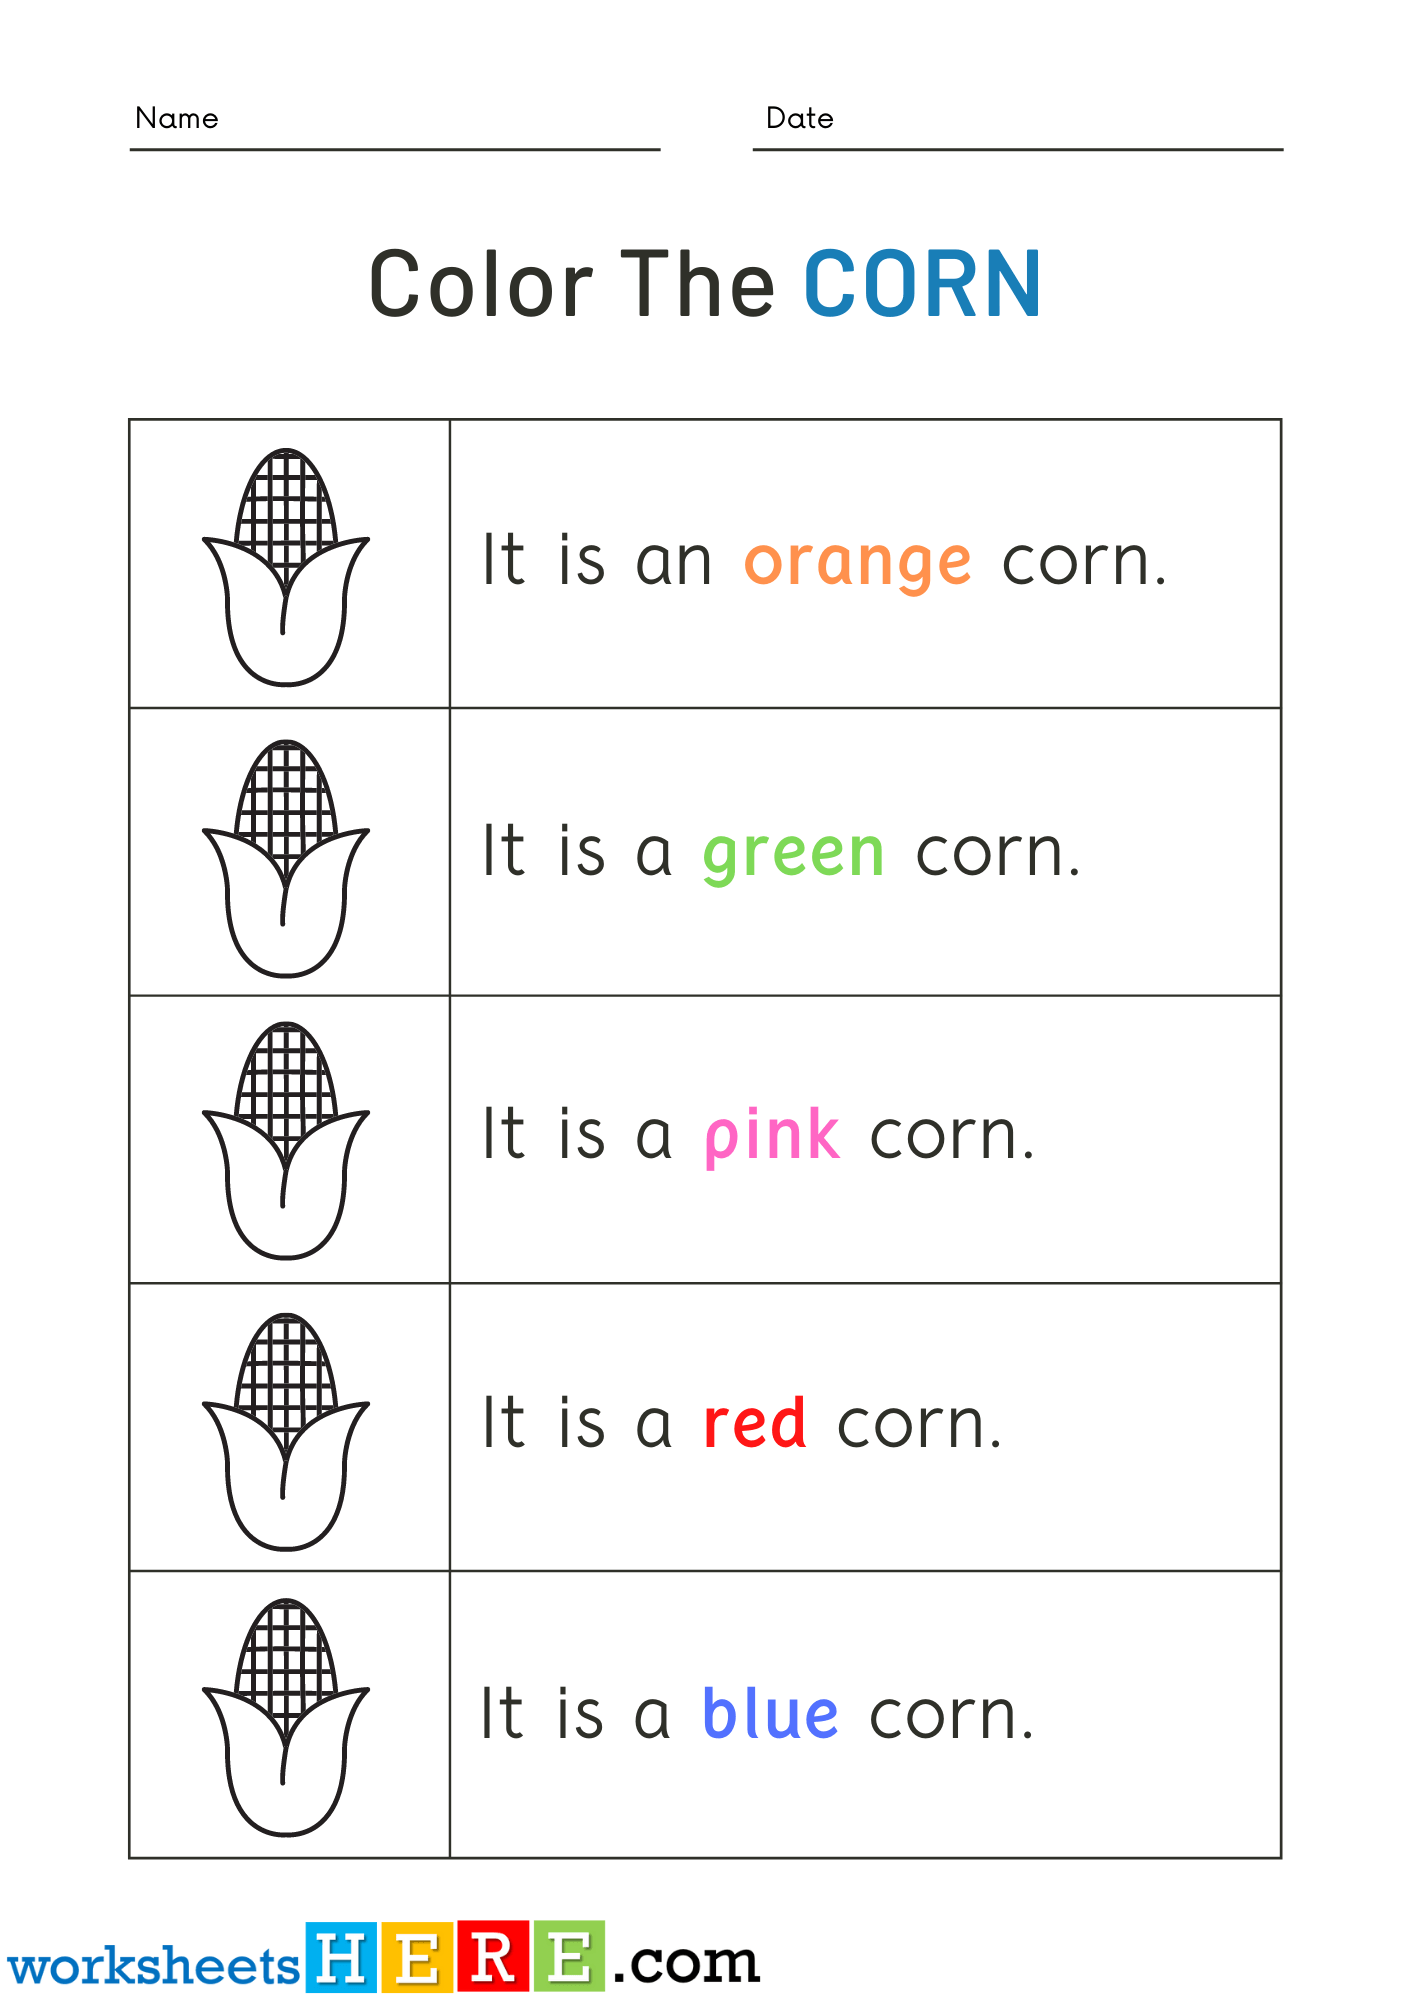 Read Words and Color Corn Pictures Activity PDF Worksheets For Kindergarten